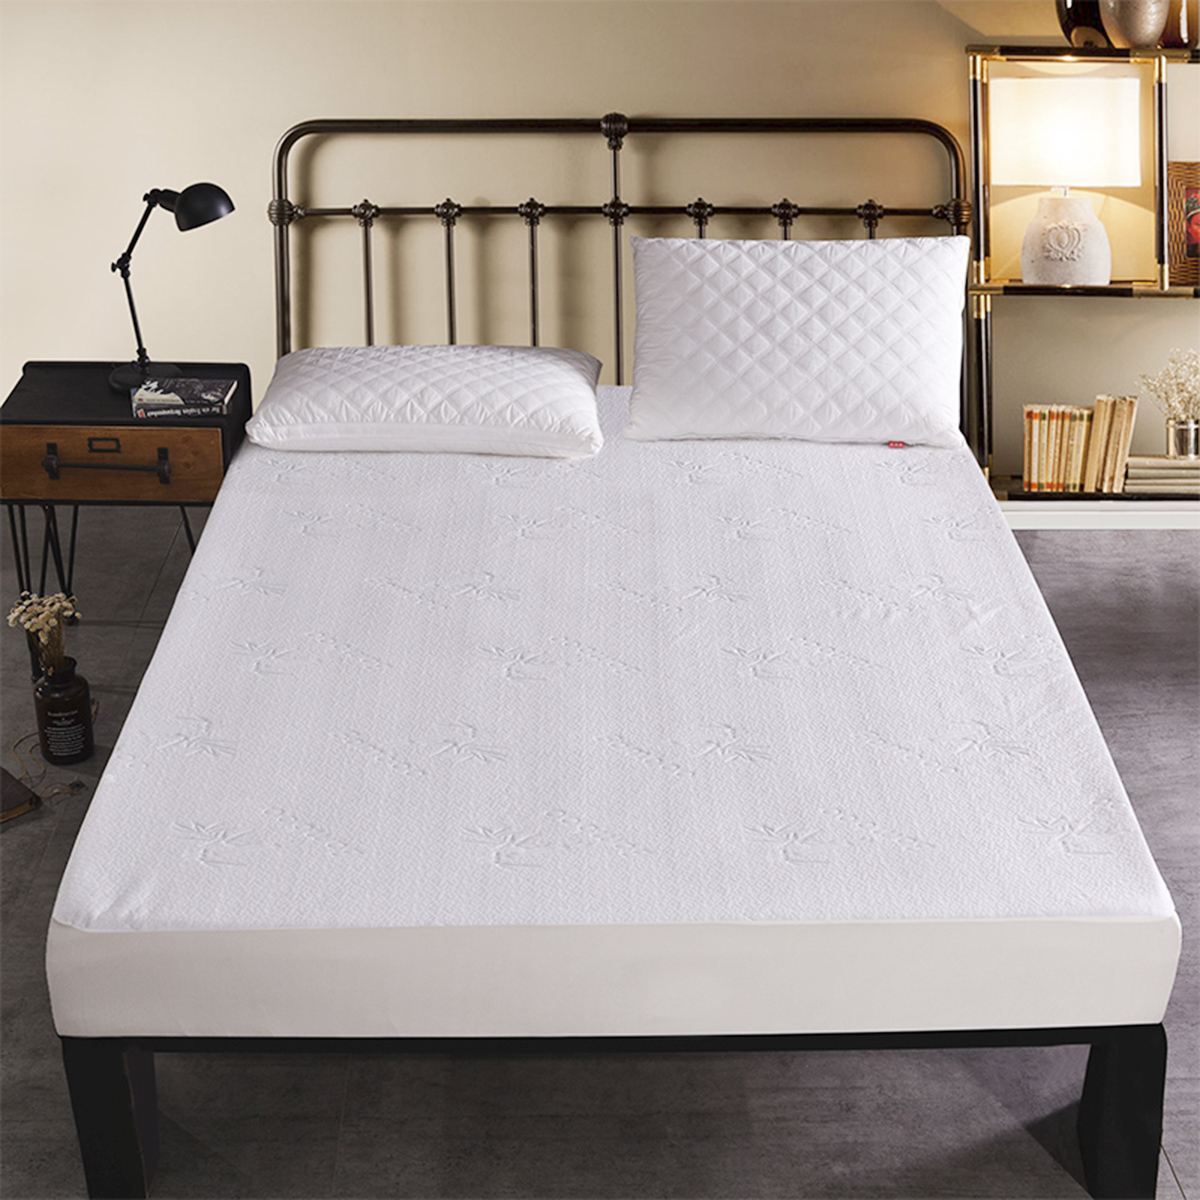 Waterproof-Bamboo-Jacquard-Mattress-Topper-Protector-Cover-Pad-Hypoallergenic-Bedding-Set-1688692-13